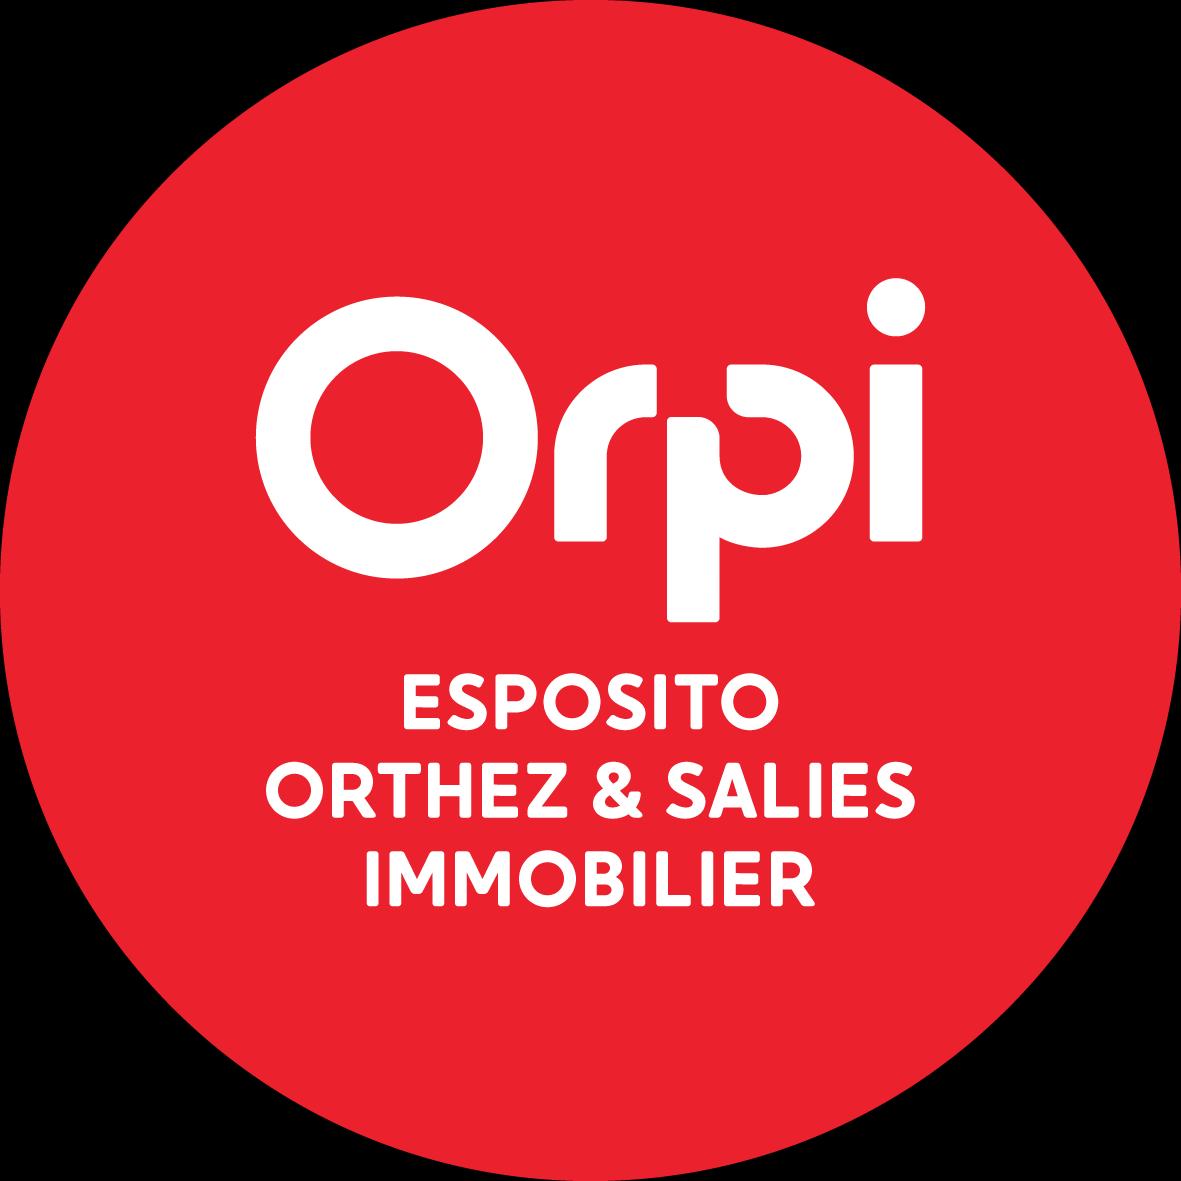 Orpi Esposito Orthez Immobilier Orthez